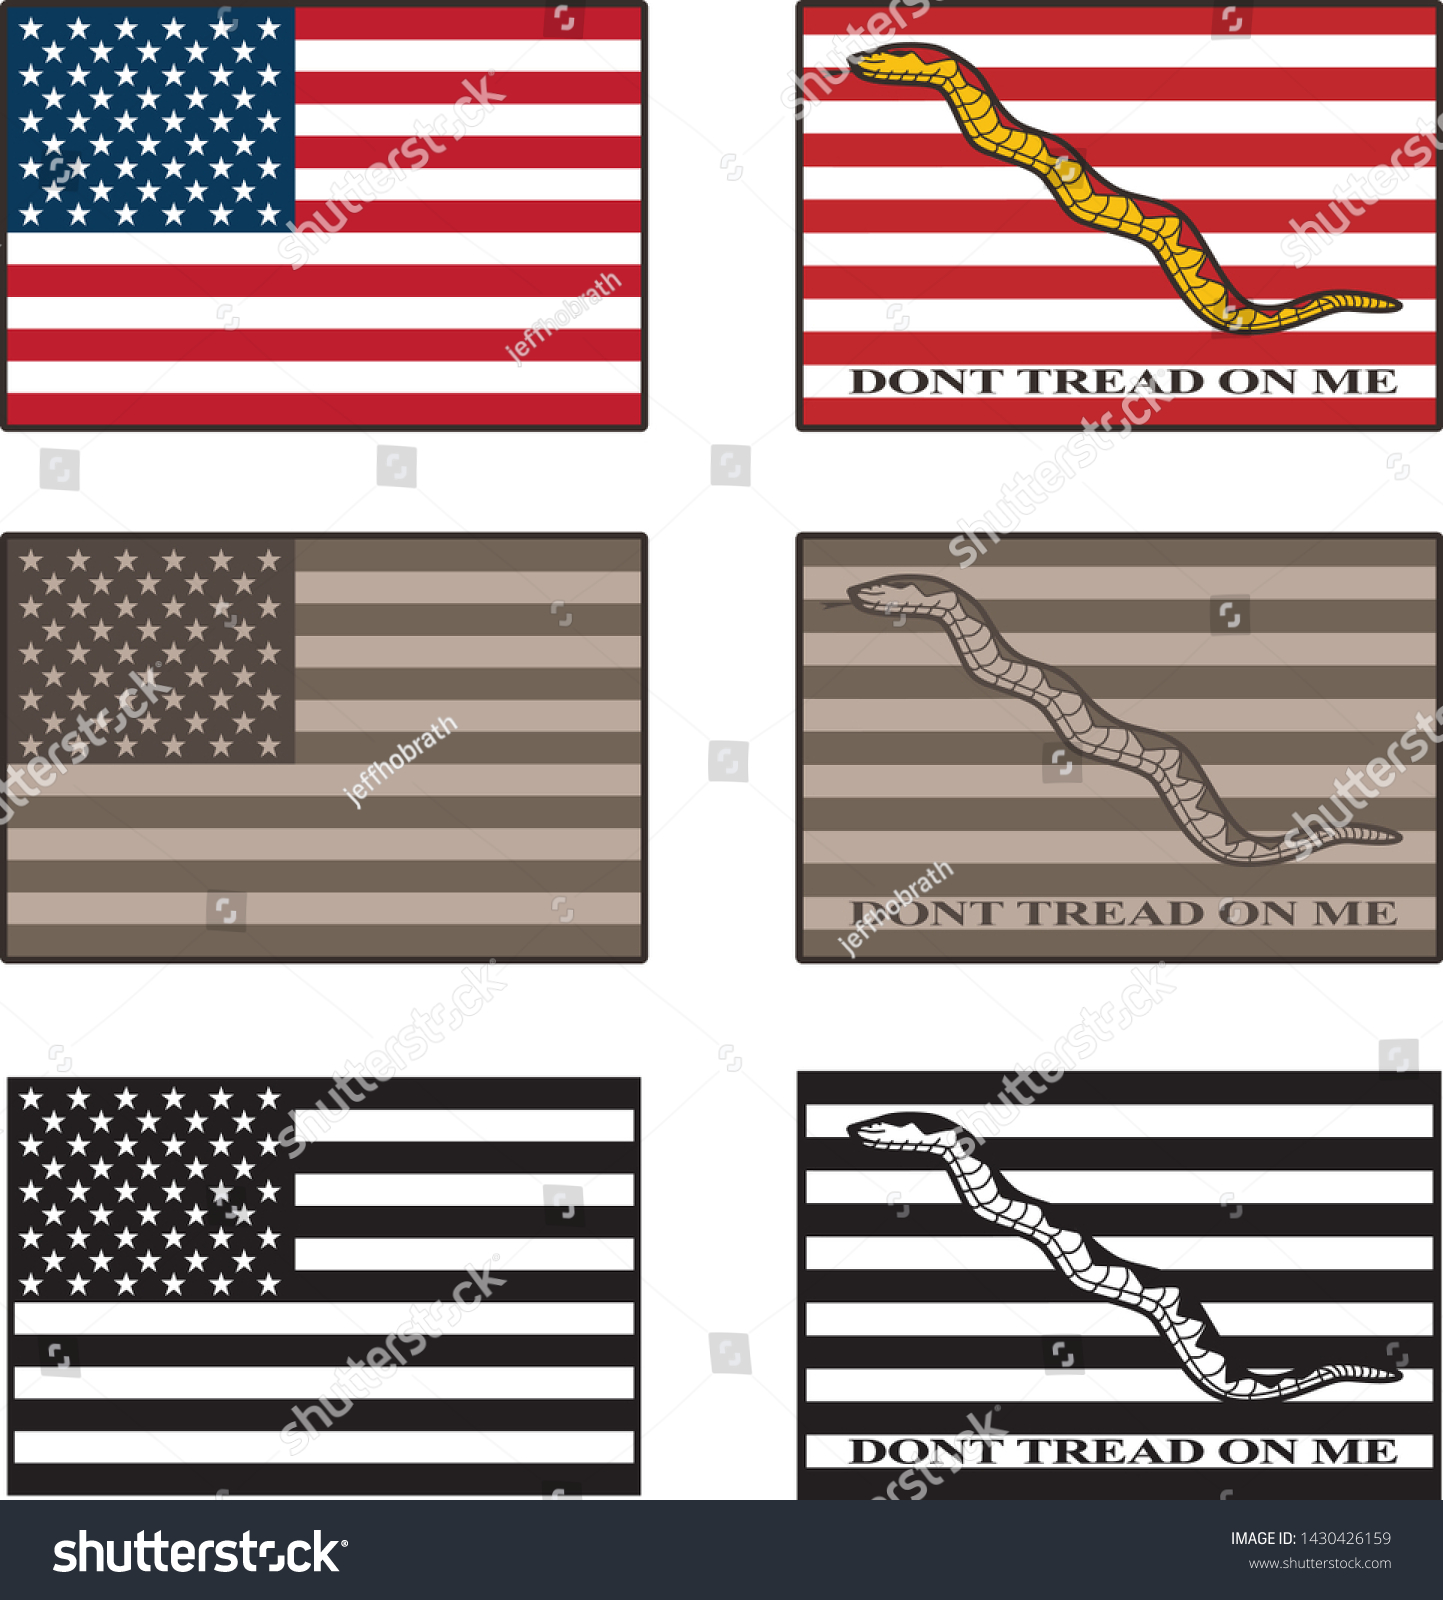 SVG of USA and Dont Tread On Me flag isolated vector illustration set in full color, desert camouflage tones, and black   svg